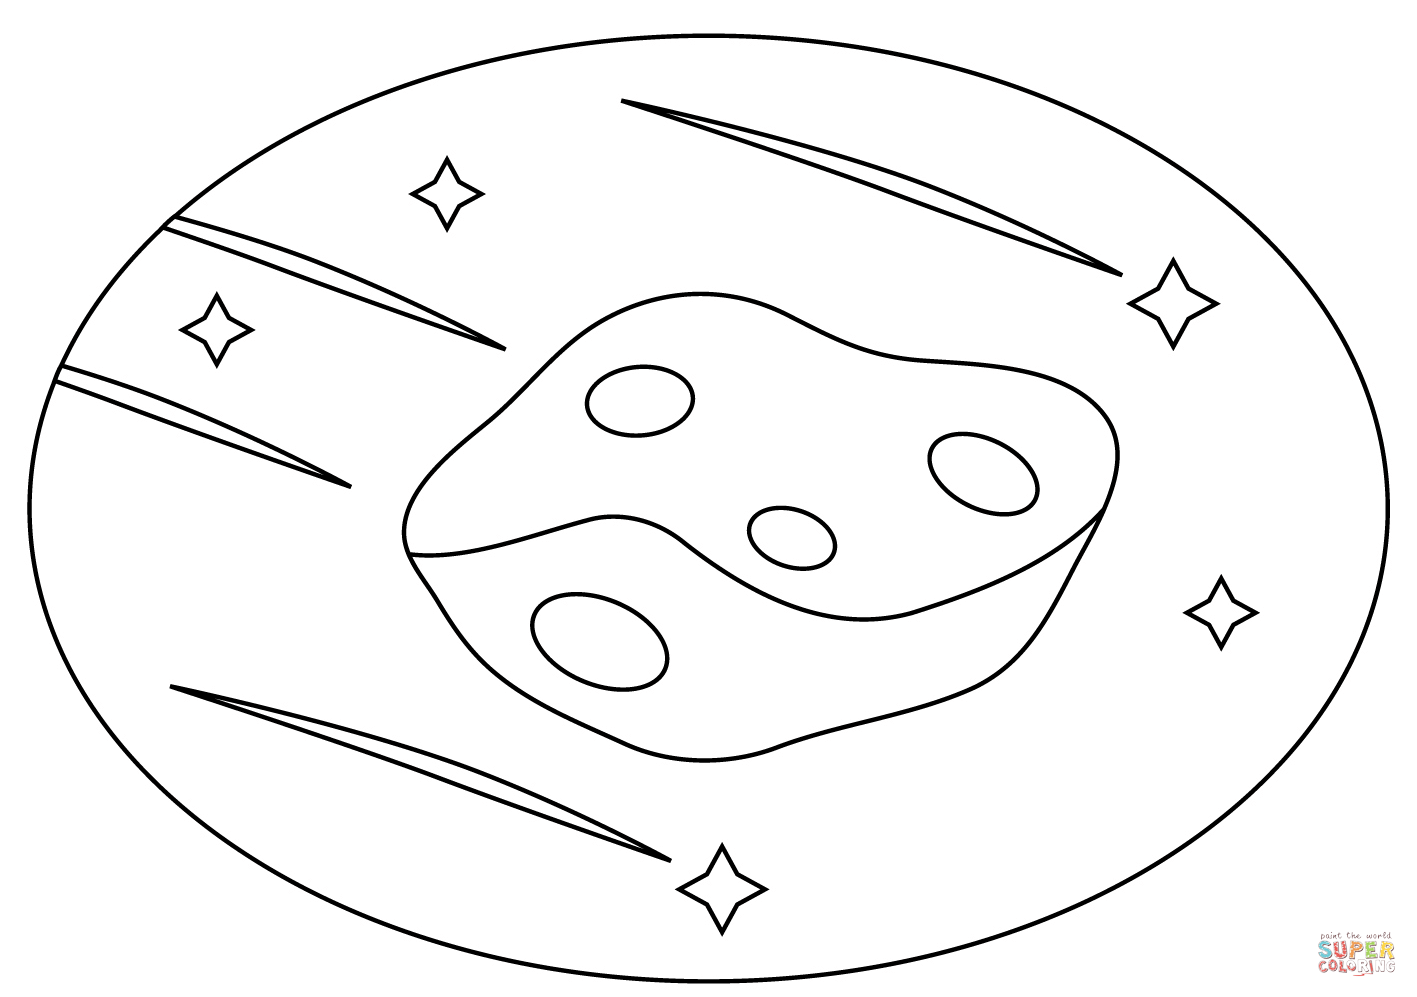 Asteroid coloring page free printable coloring pages